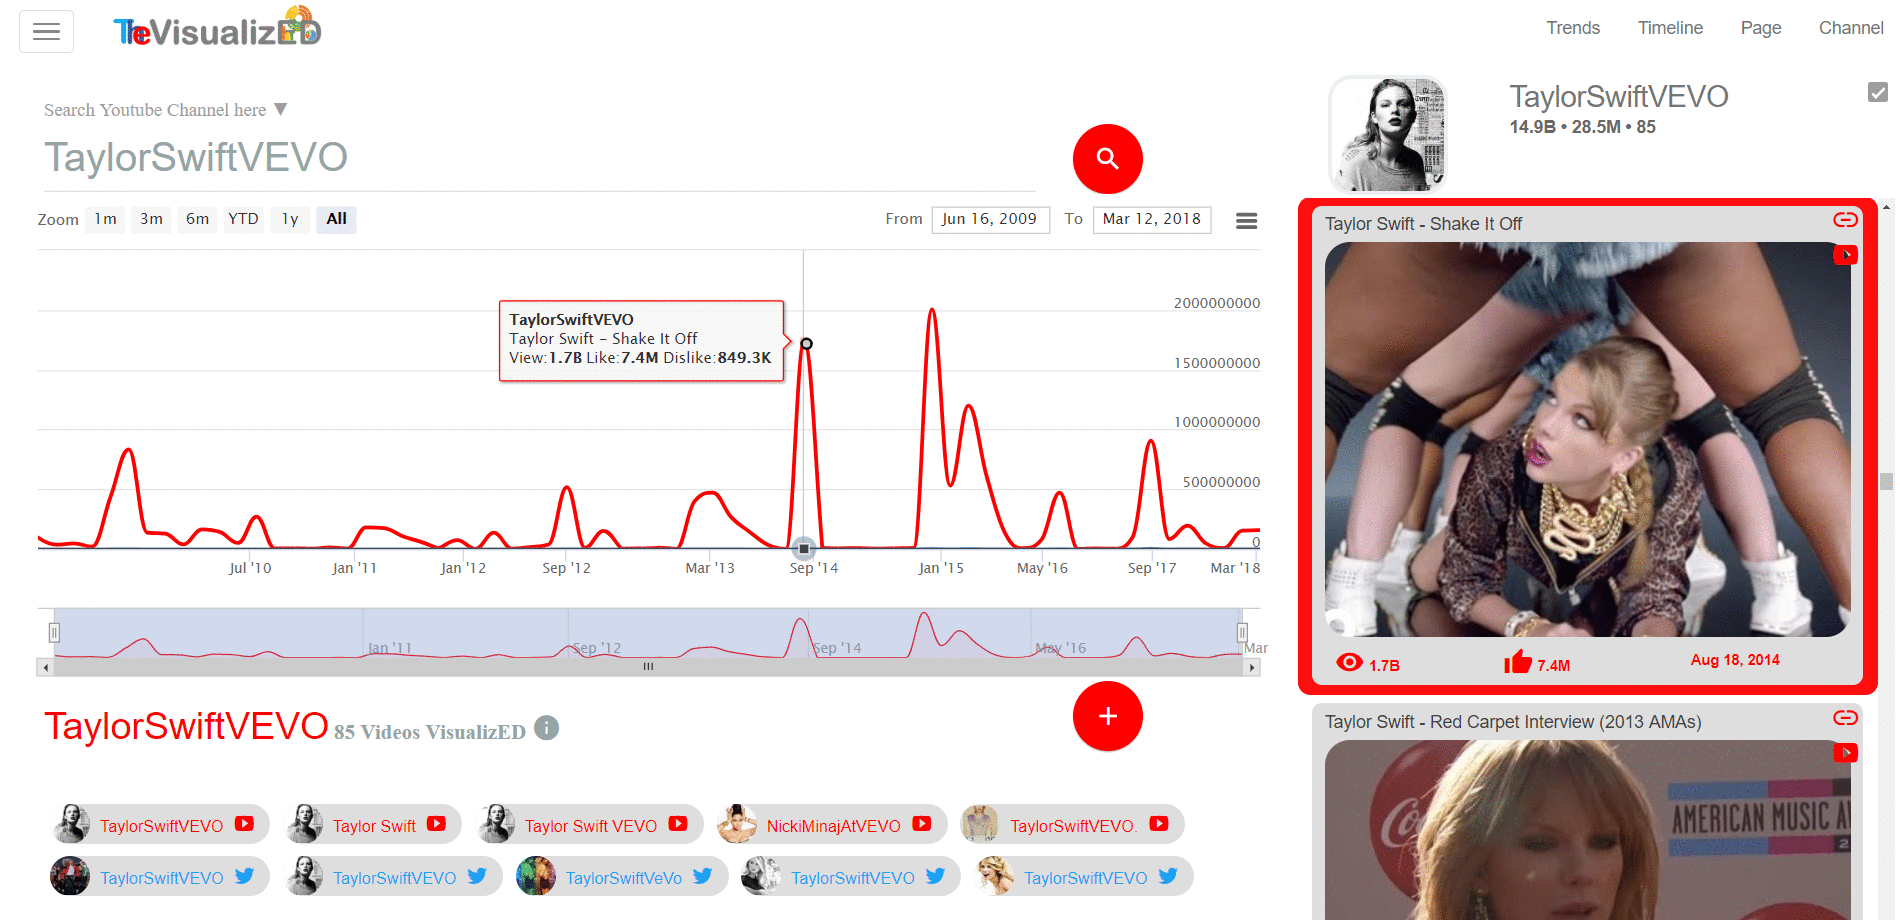 TheVisualized YouTube Channel of Taylor Swift VEVO